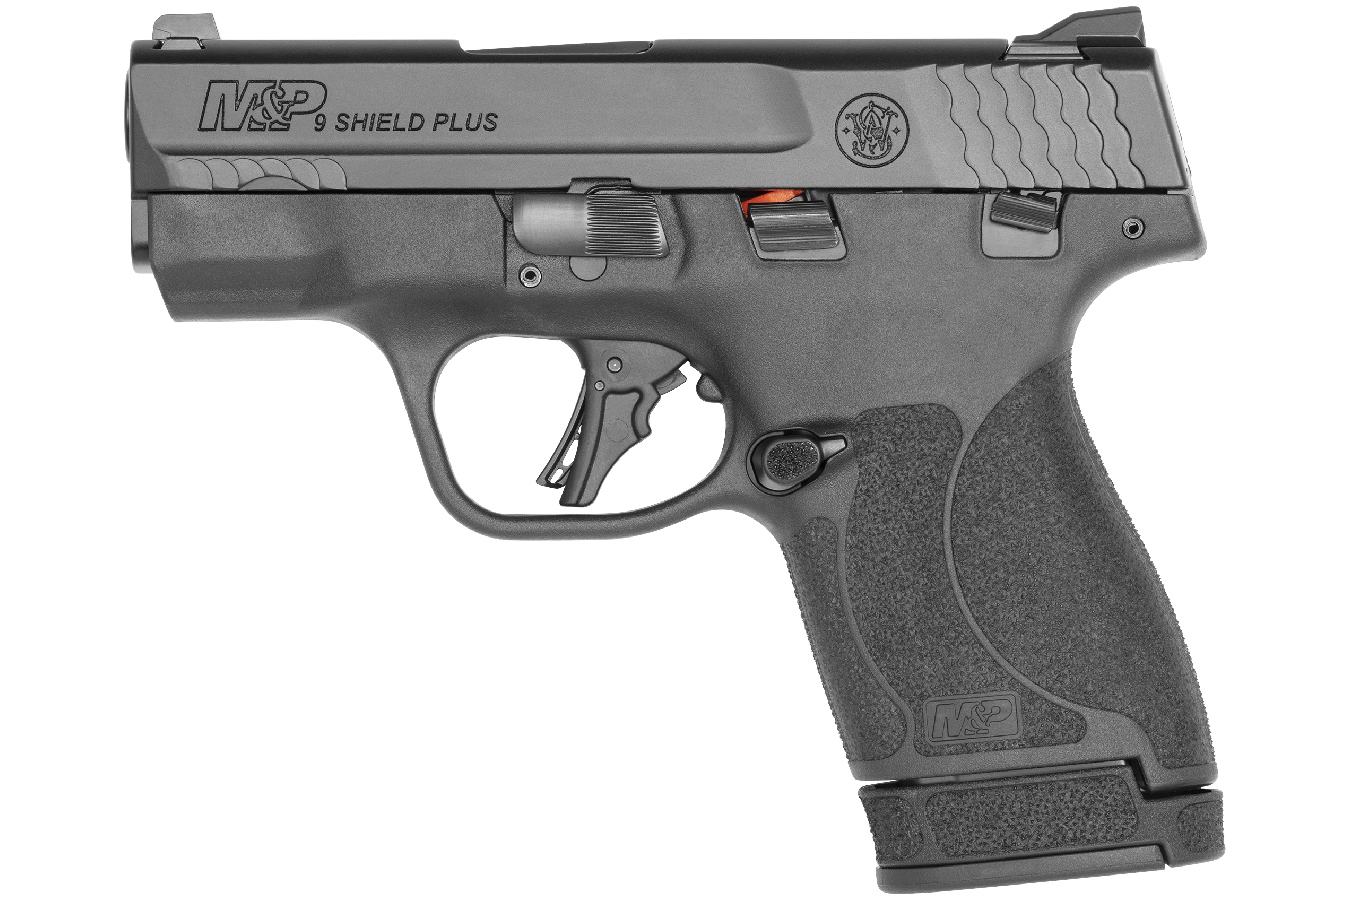 MP9 SHIELD PLUS 9MM MICRO COMPACT PISTOL WITH THUMB SAFETY